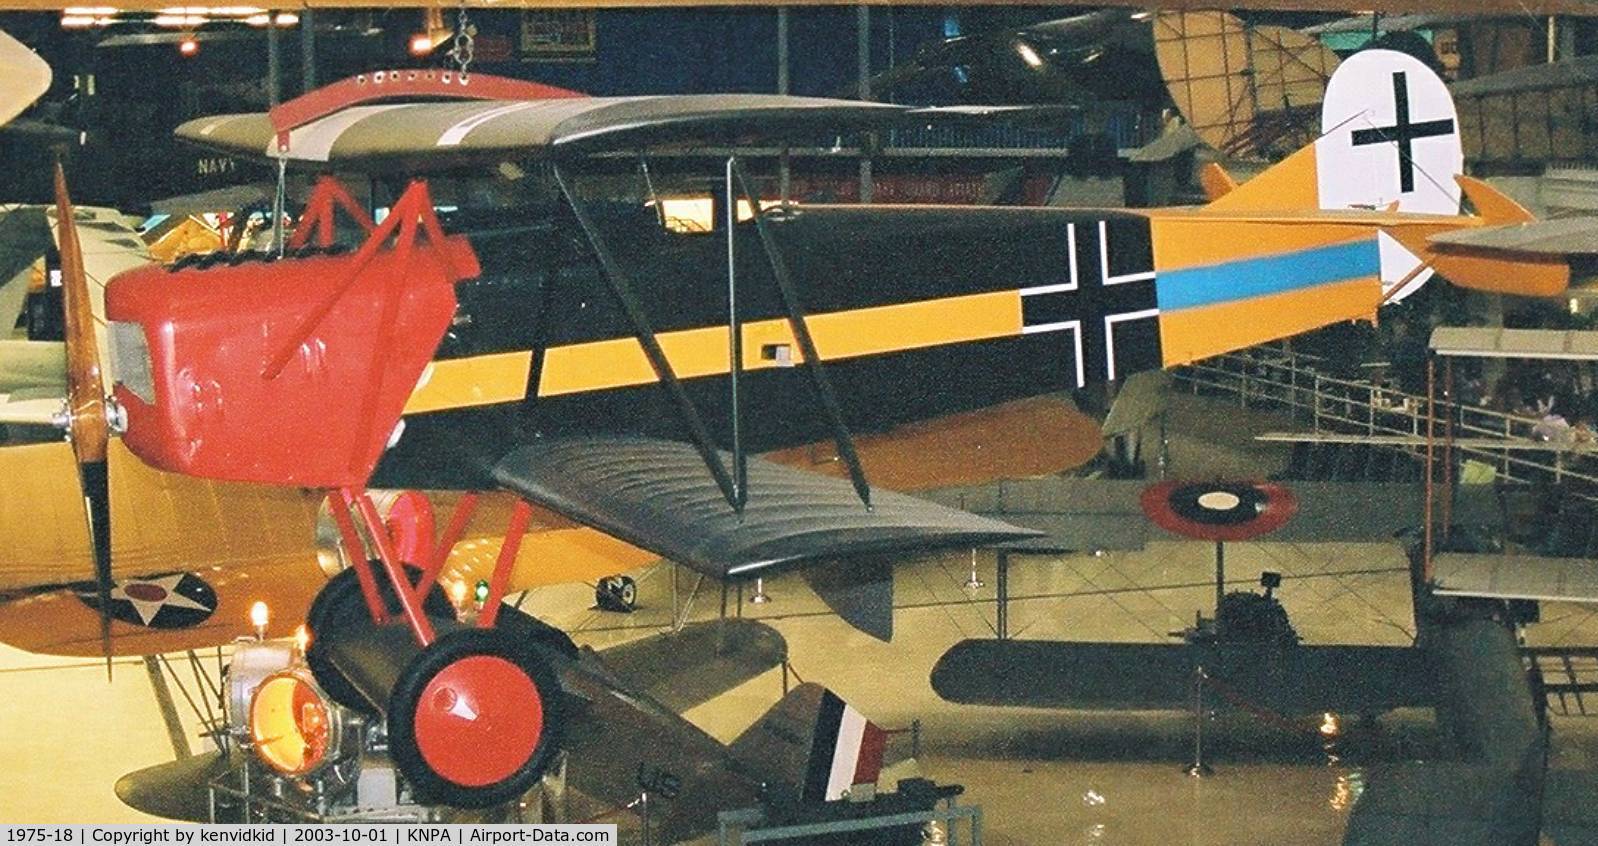 1975-18, Fokker D.VII Replica C/N Not found 1975-18, On display at the Museum of Naval Aviation, Pensacola.